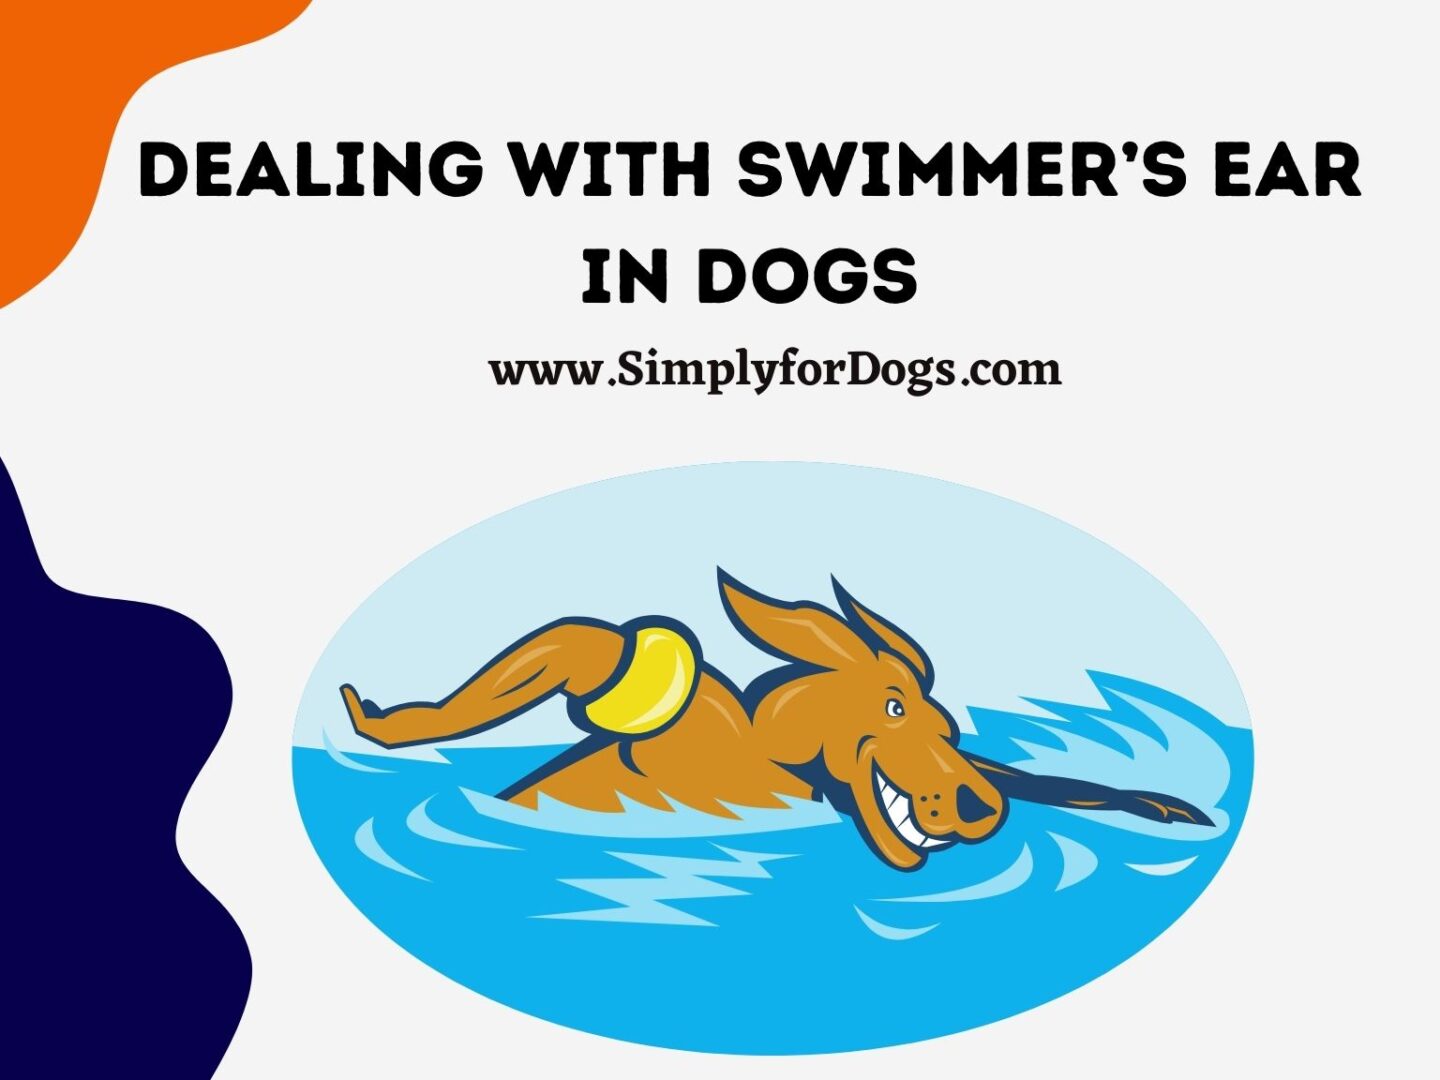 Dealing with Swimmer’s Ear in Dogs